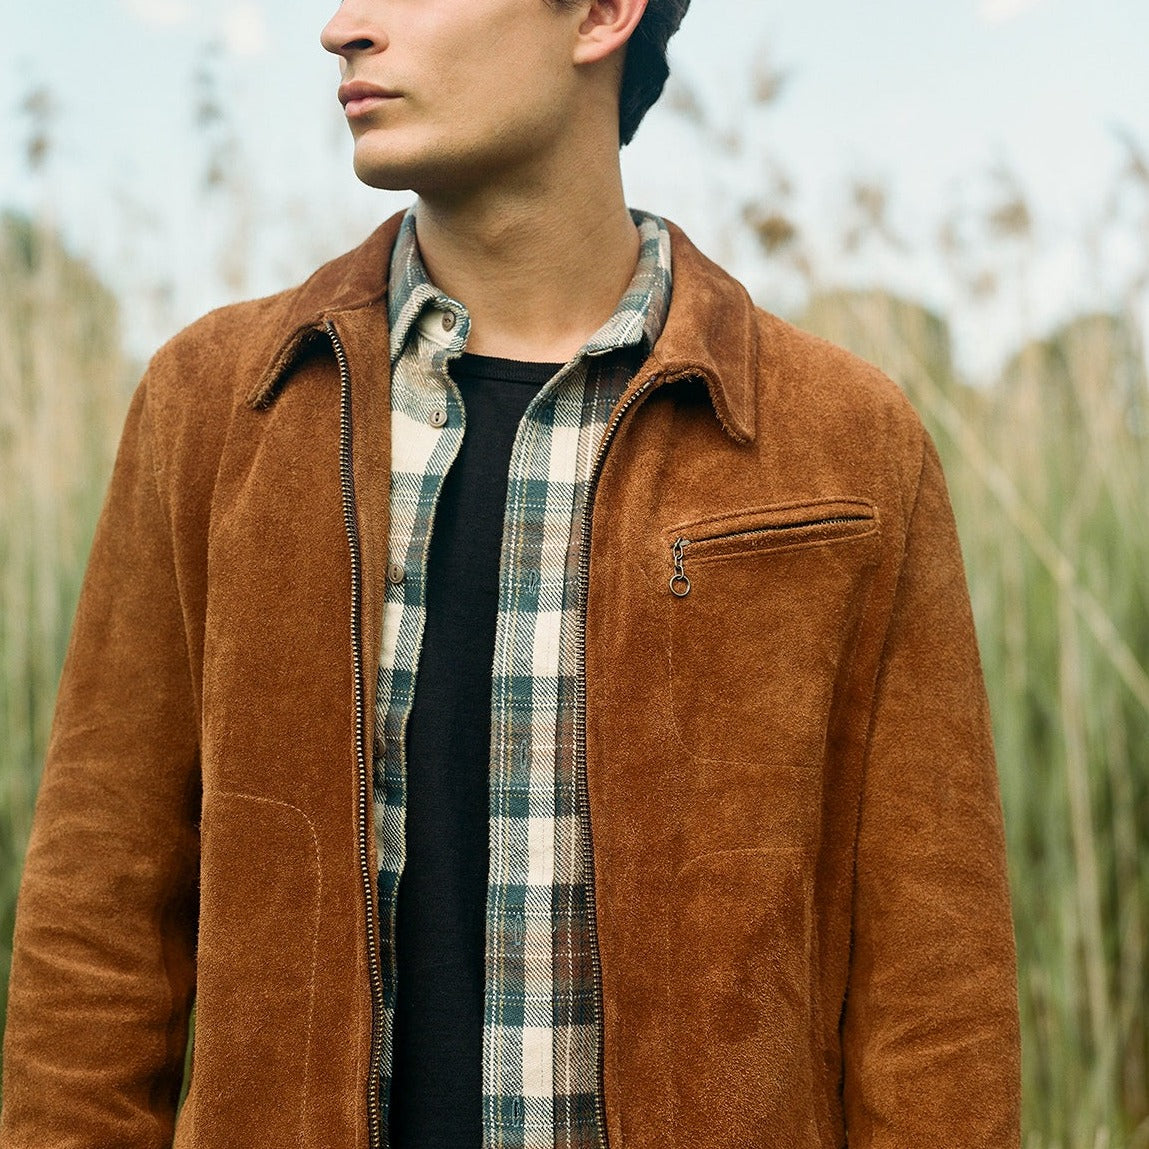 Unlined Rough Out Cowhide Jacket